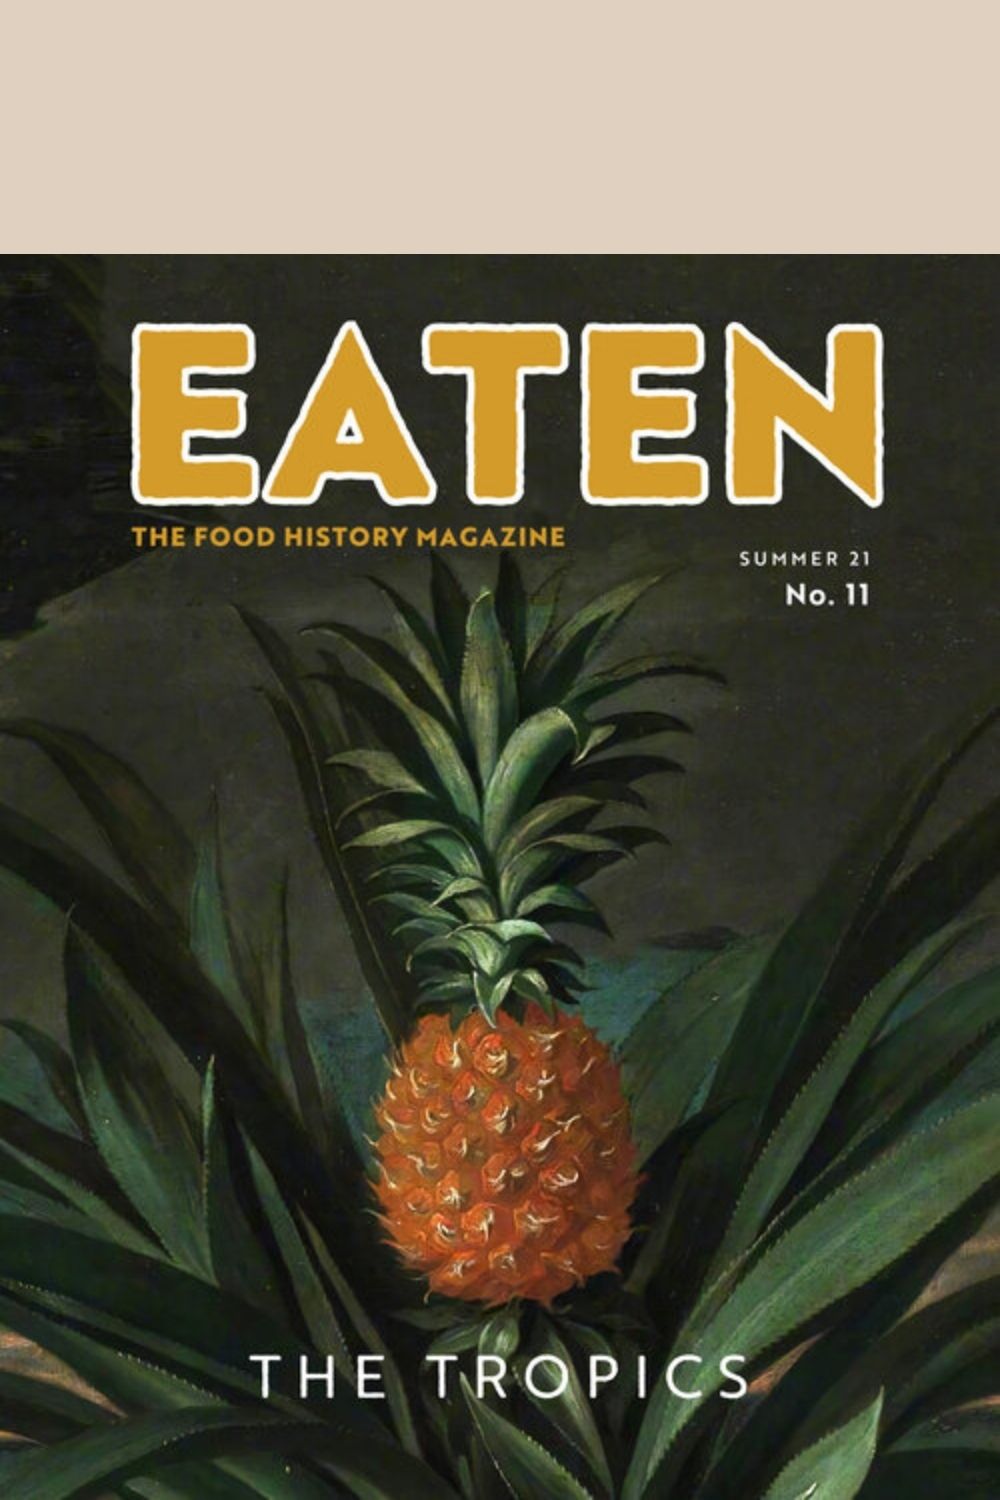 Front cover of Eaten magazine Issue 11 The Tropics